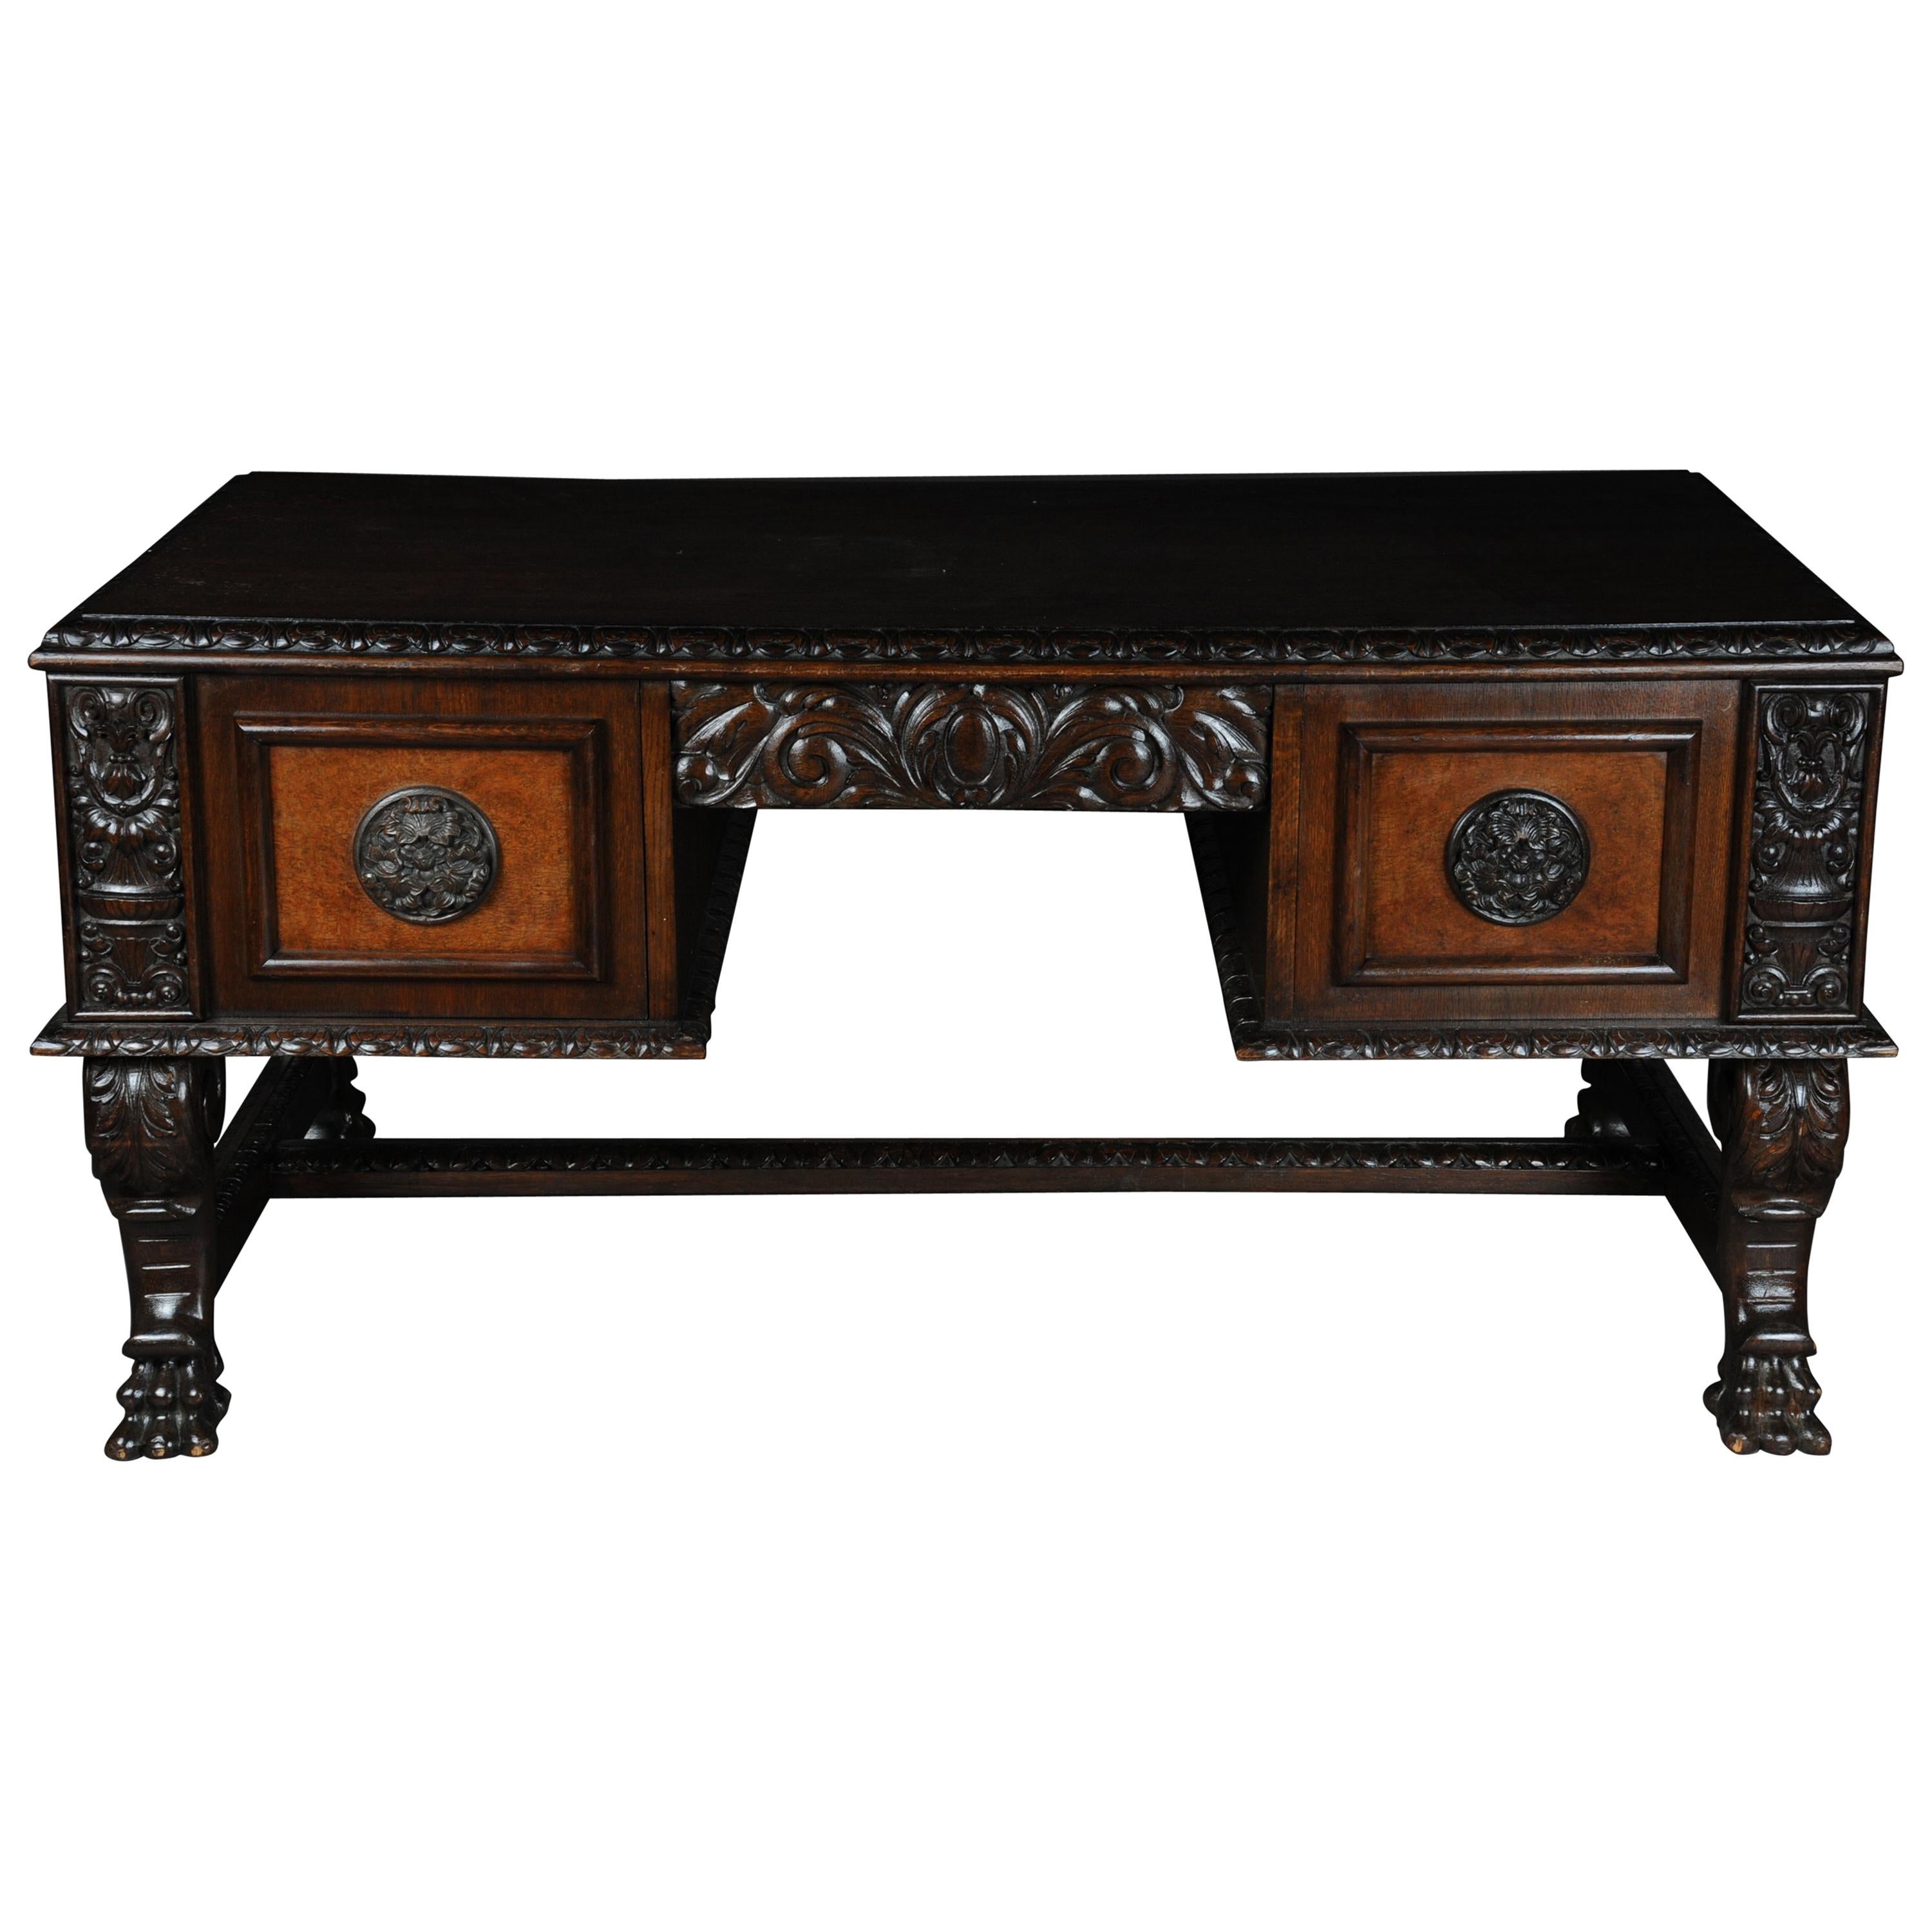 20th Century Lordly Historicism Desk Solid Oak with Walnut Veneer